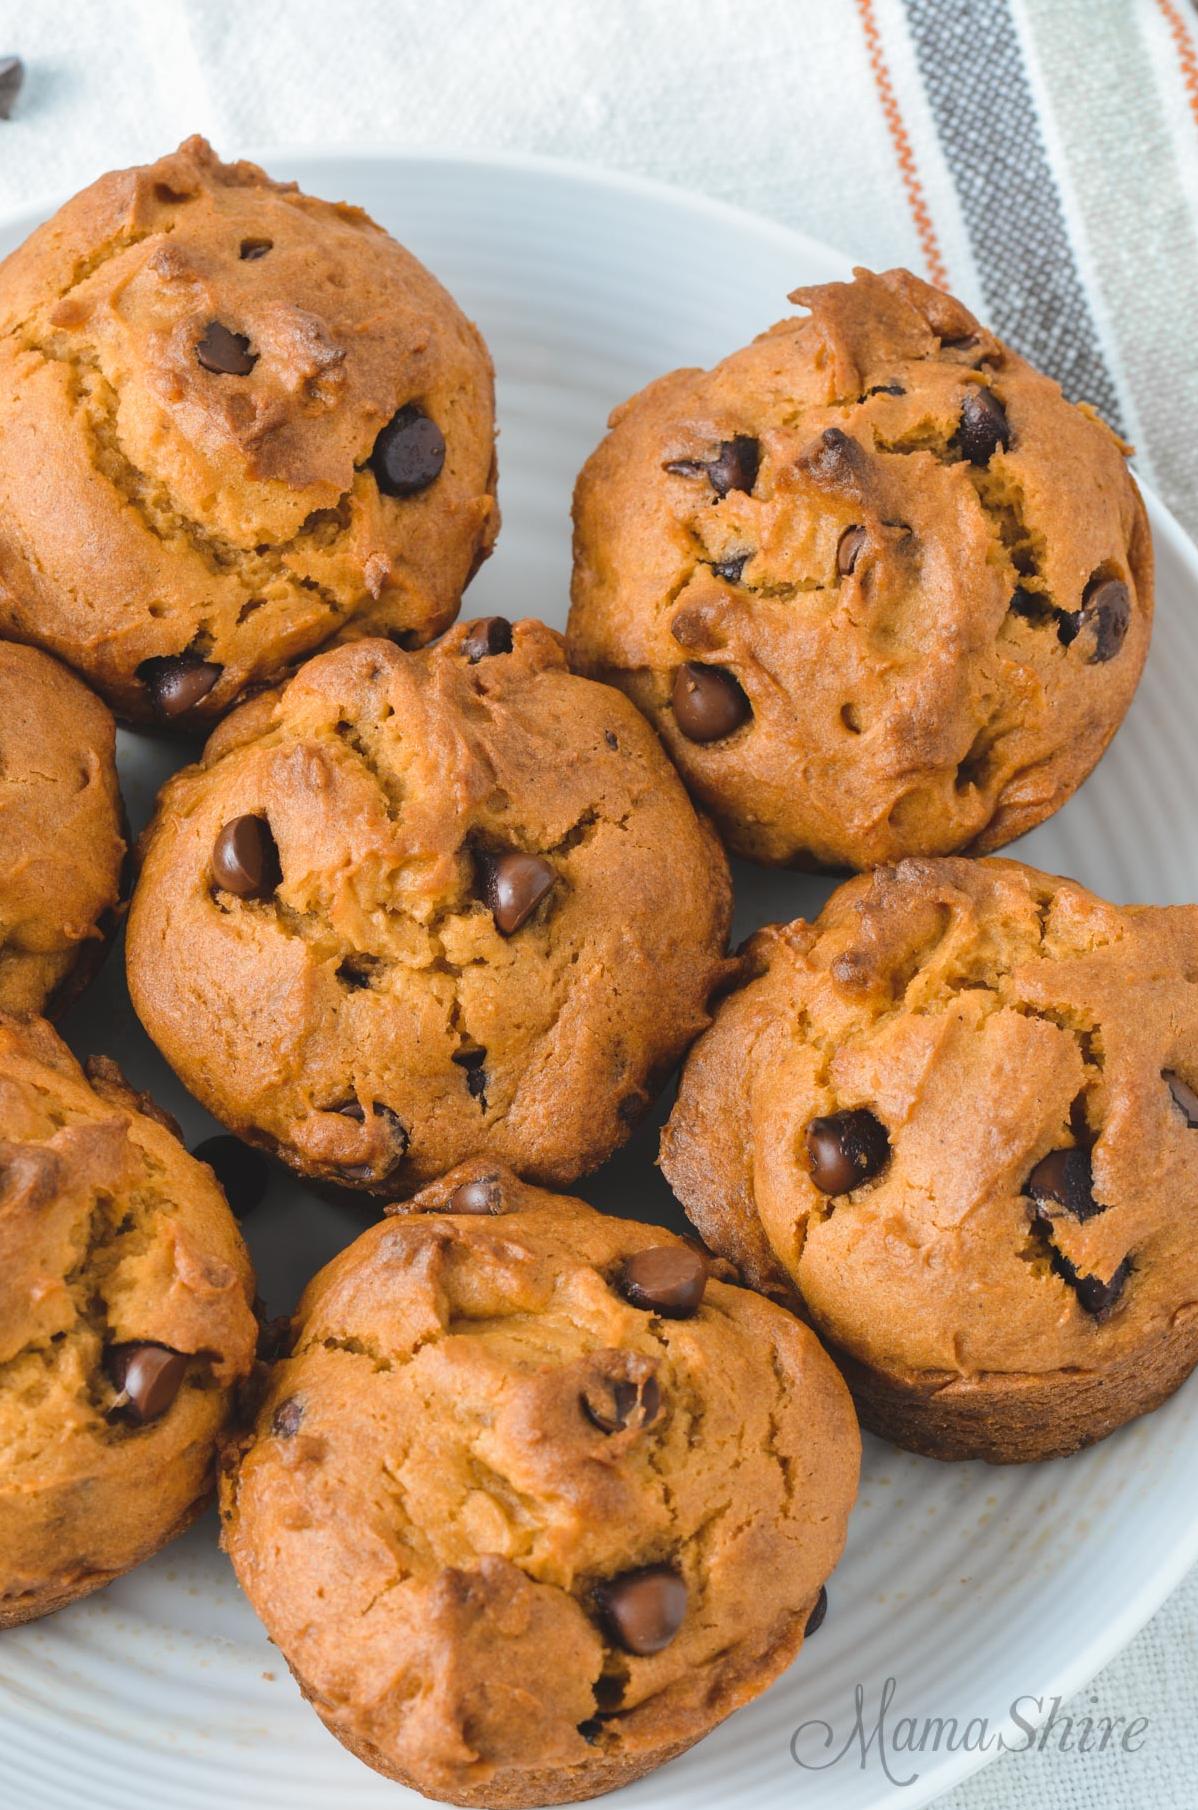  Who says gluten-free can't be delicious? These muffins will change your mind.